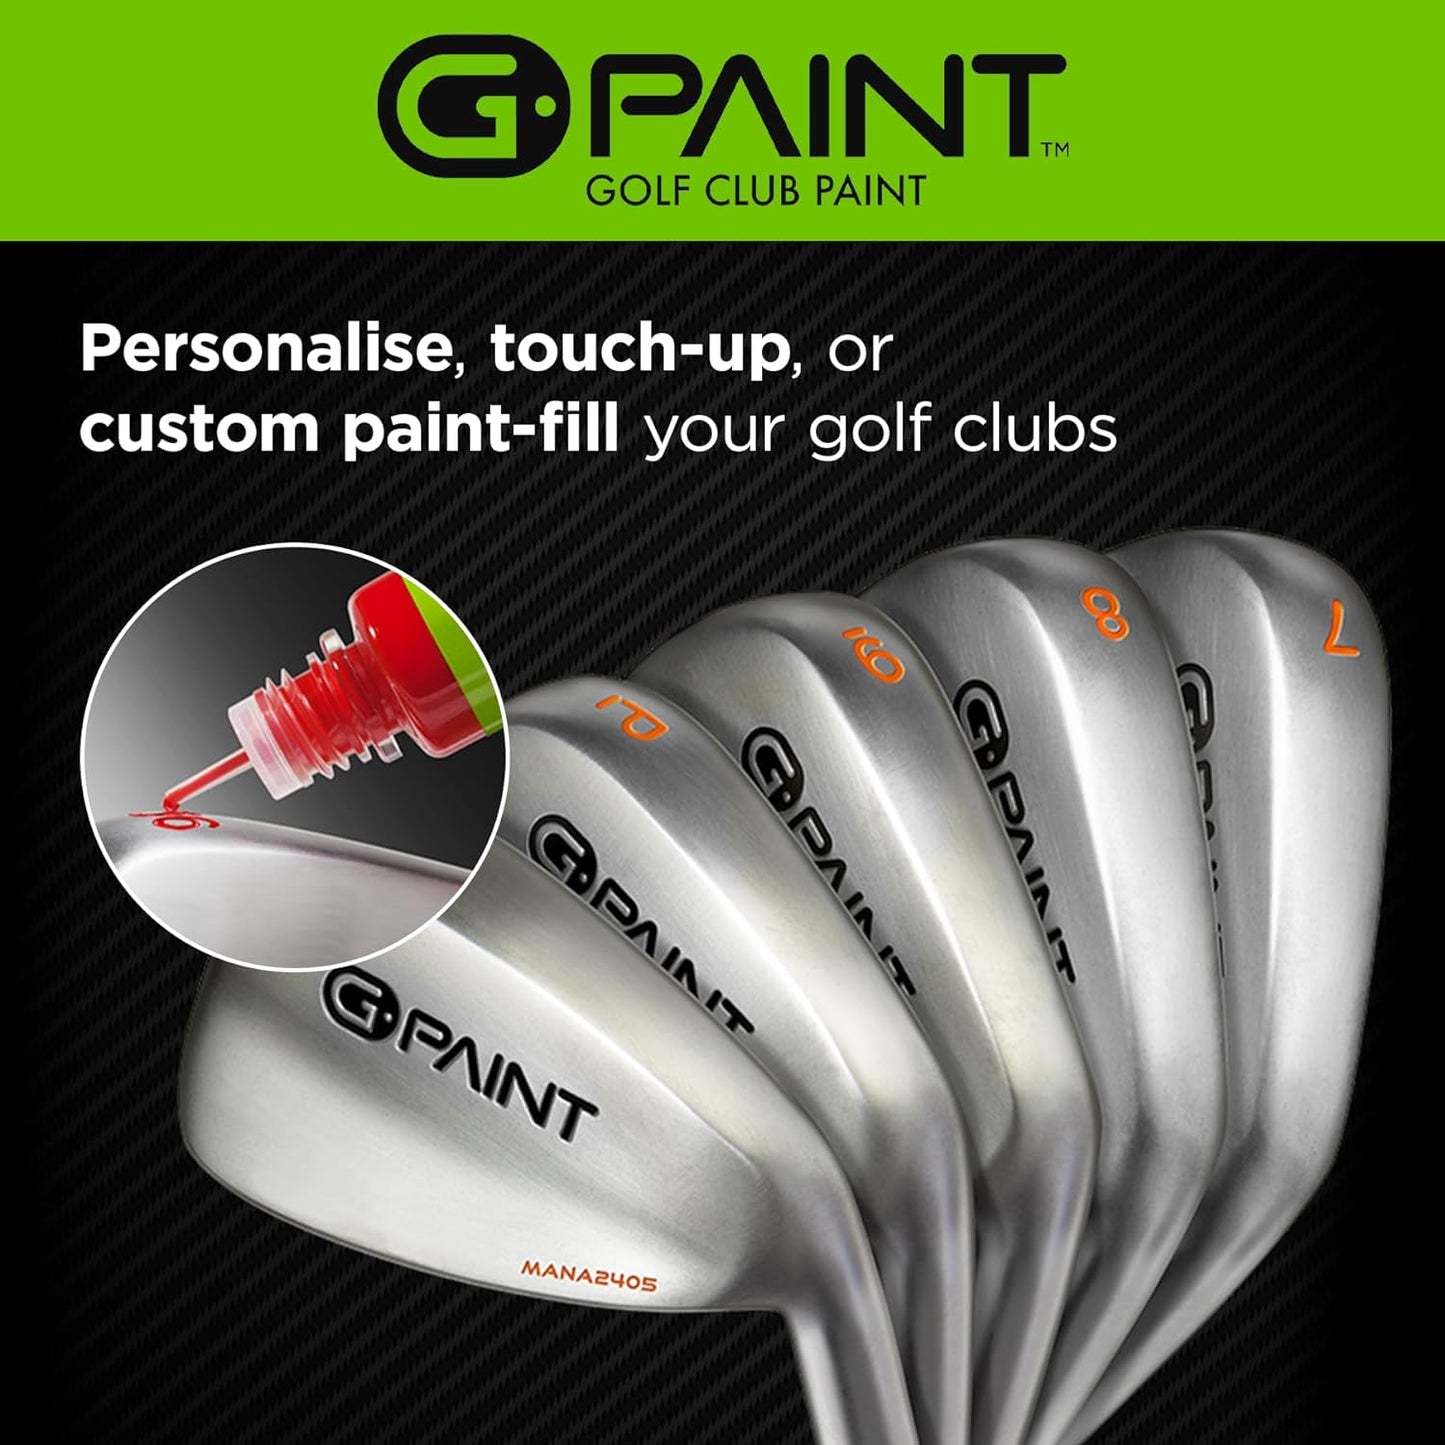 GPaint Golf Club Paint - 4 Pack (Black/White/Red/Blue) at